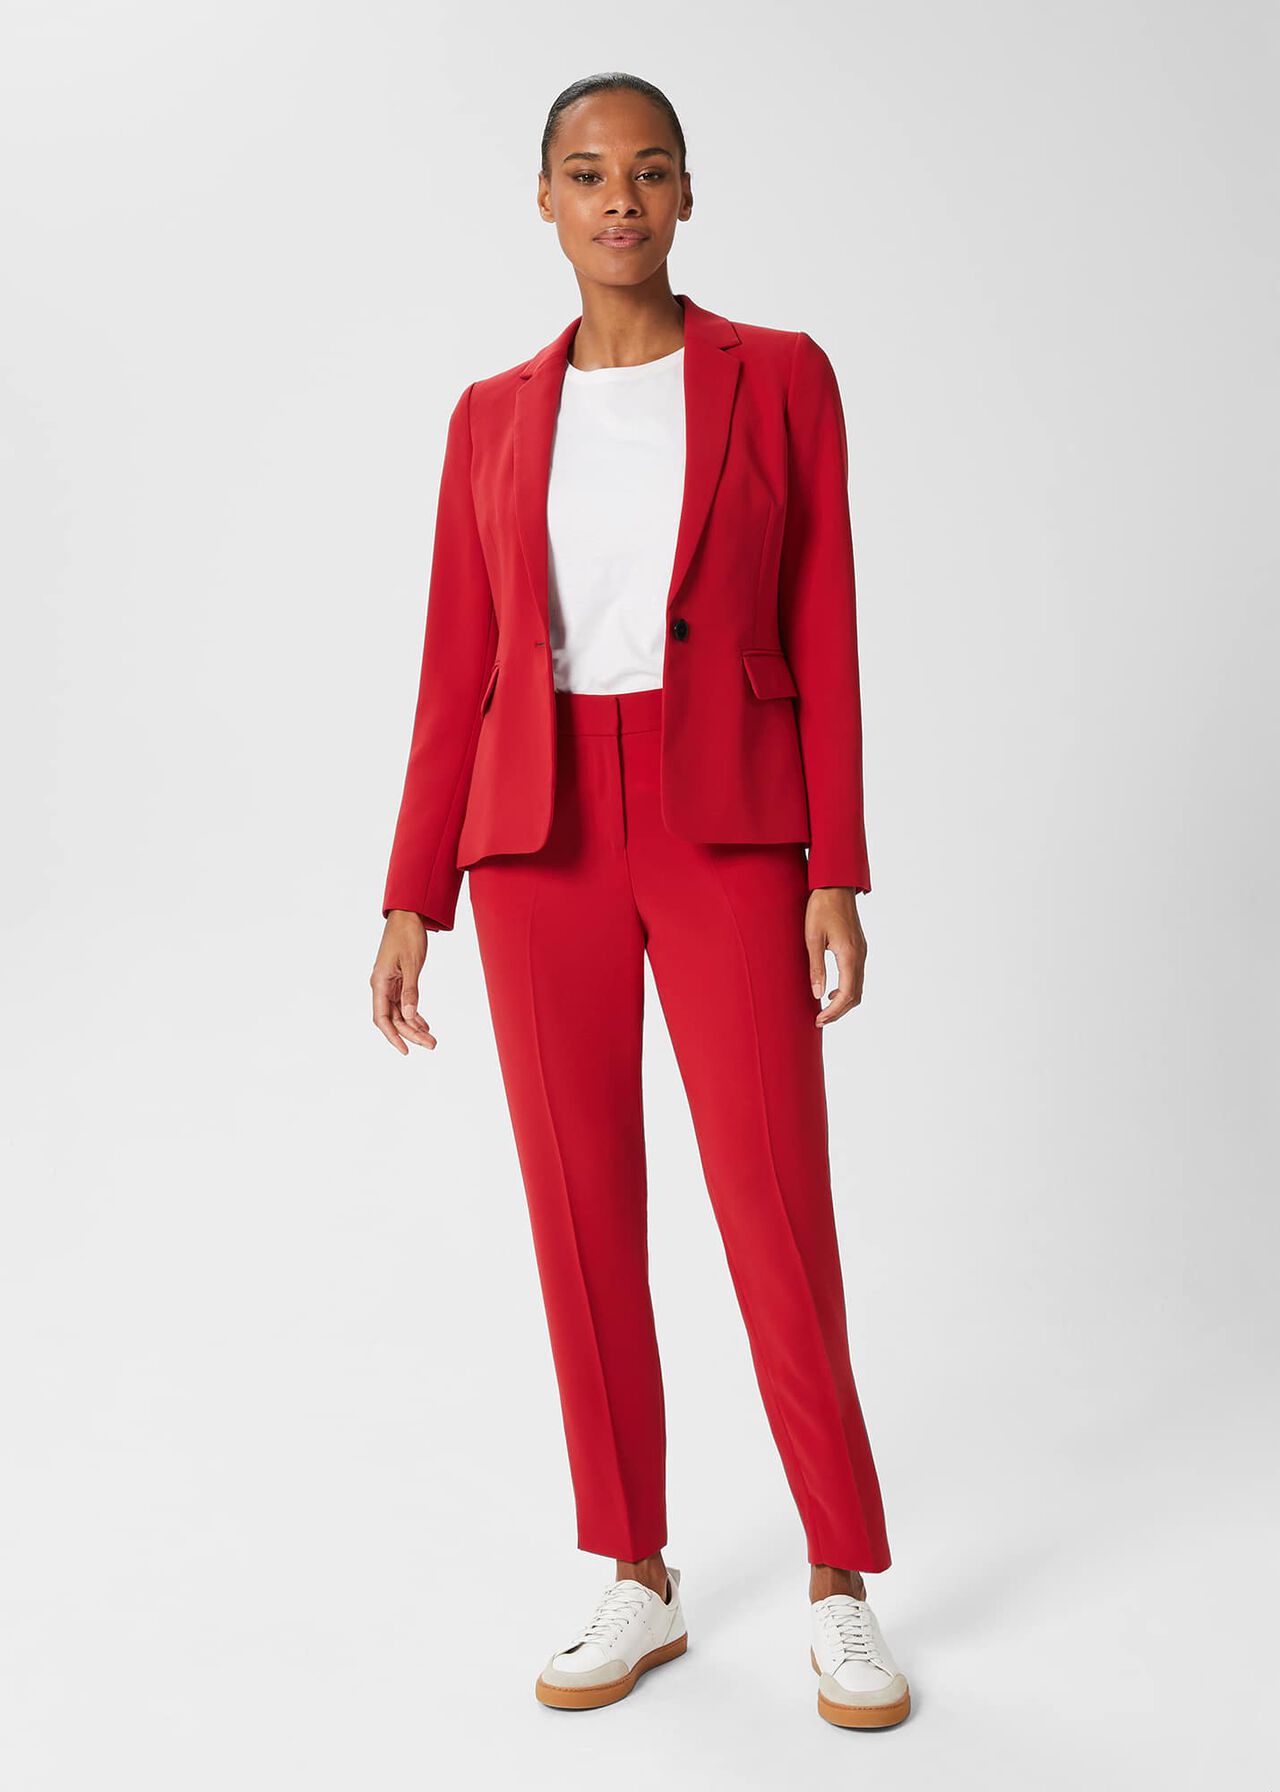 Adelia Trouser Suit Outfit